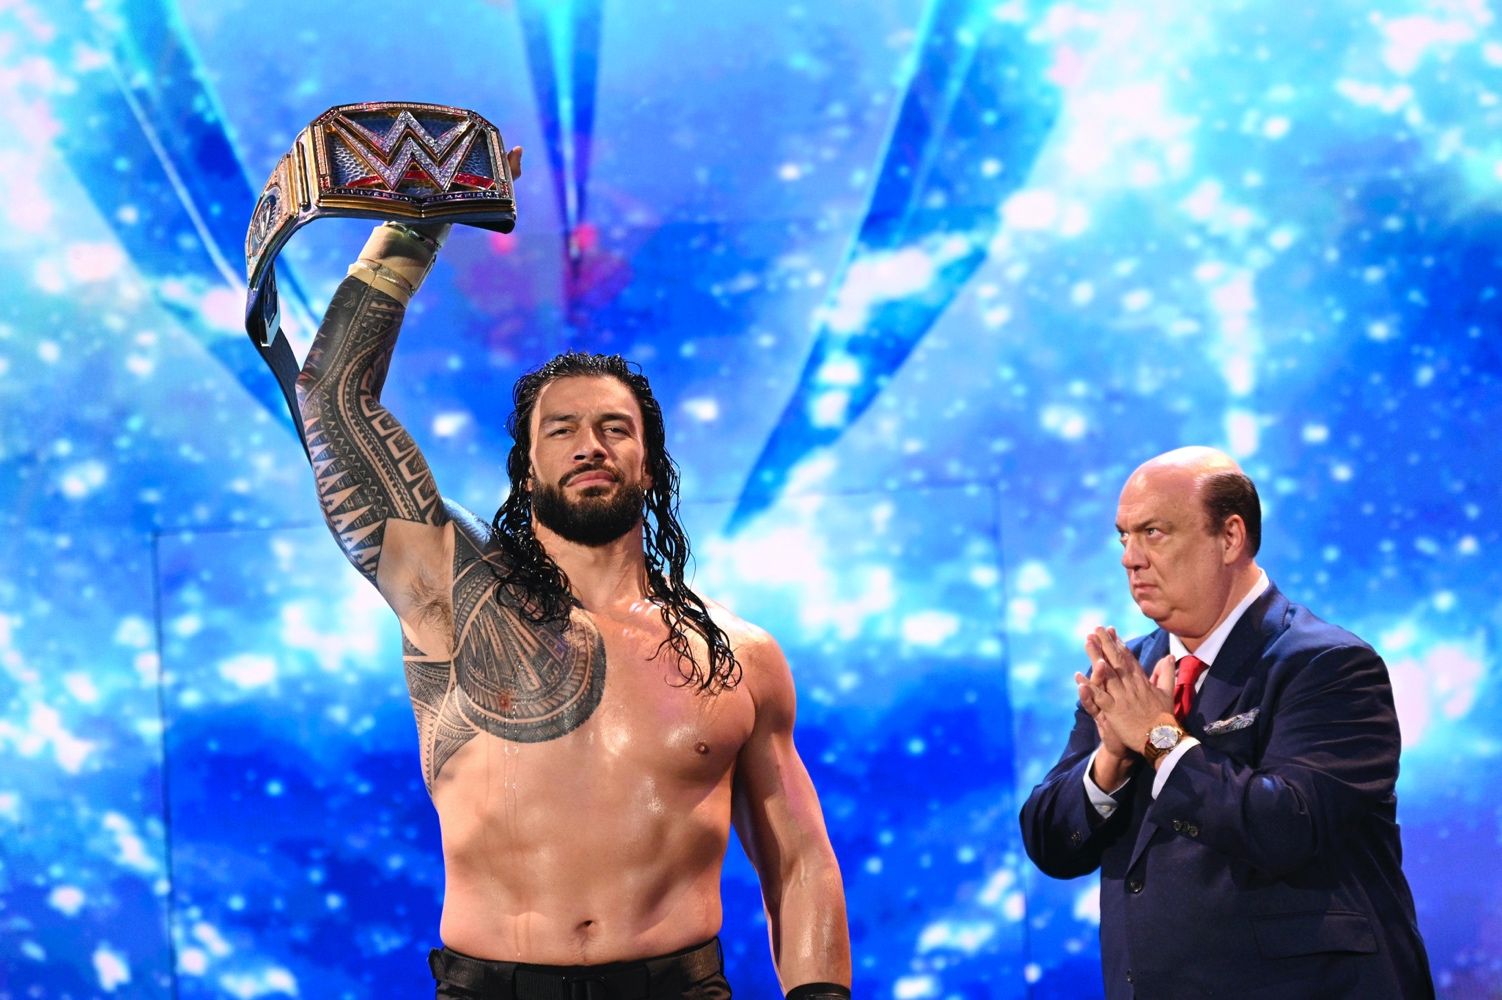 1502px x 1000px - WWE's Roman Reigns Shared His Diet and Workout to Build Muscle